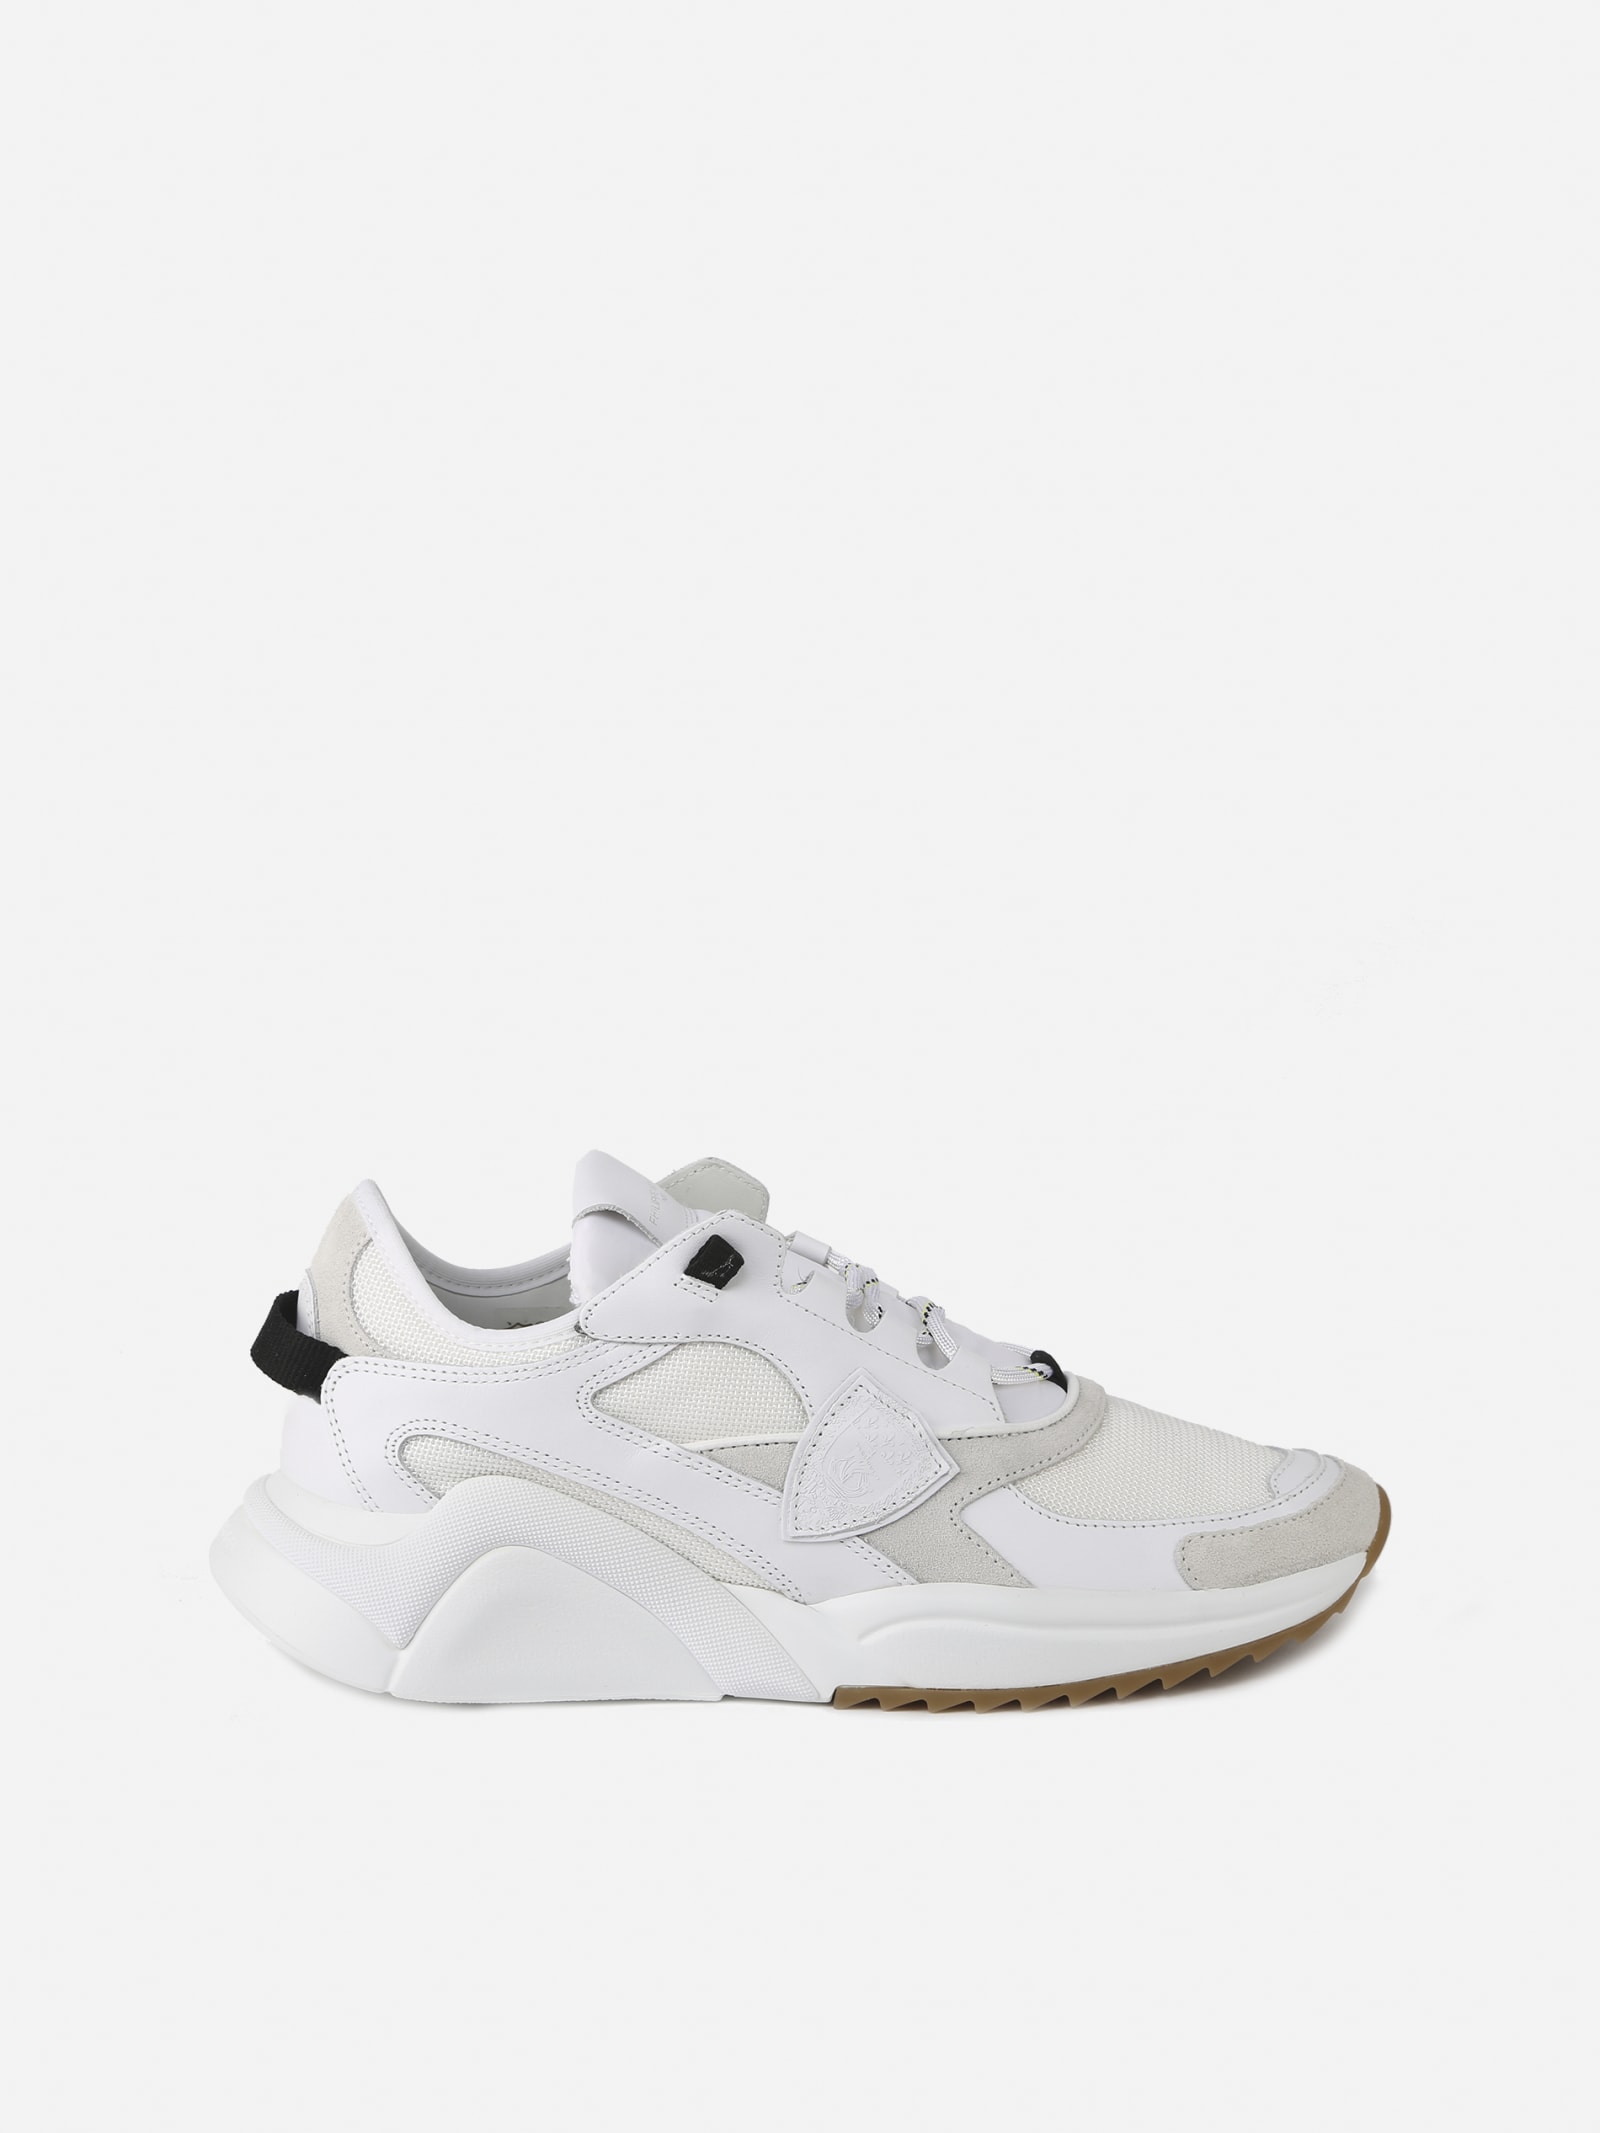 Philippe Model Eze Low Sneakers In White Leather And Fabric